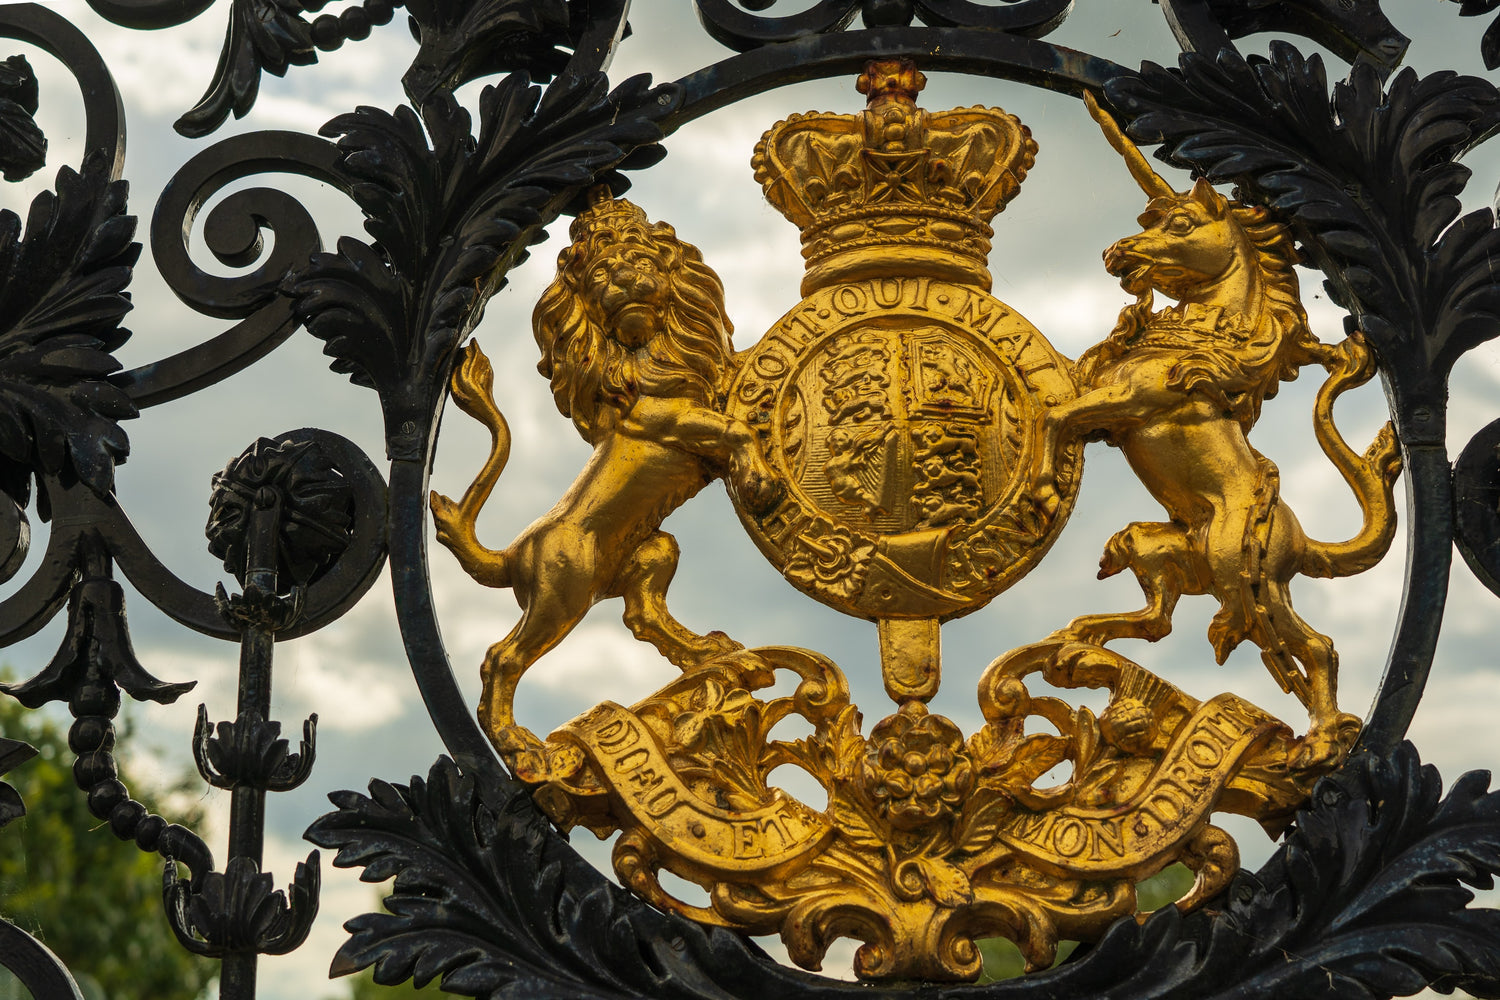 A wrought iron gat with a golden top, fashioned to resemble a lion and a unicorn, symbols of England, the inspirations for the title to George Orwell's essay The Lion and The Unicorn: Socialism and The English Genius (Photo by Nick Fewings on Unsplash)